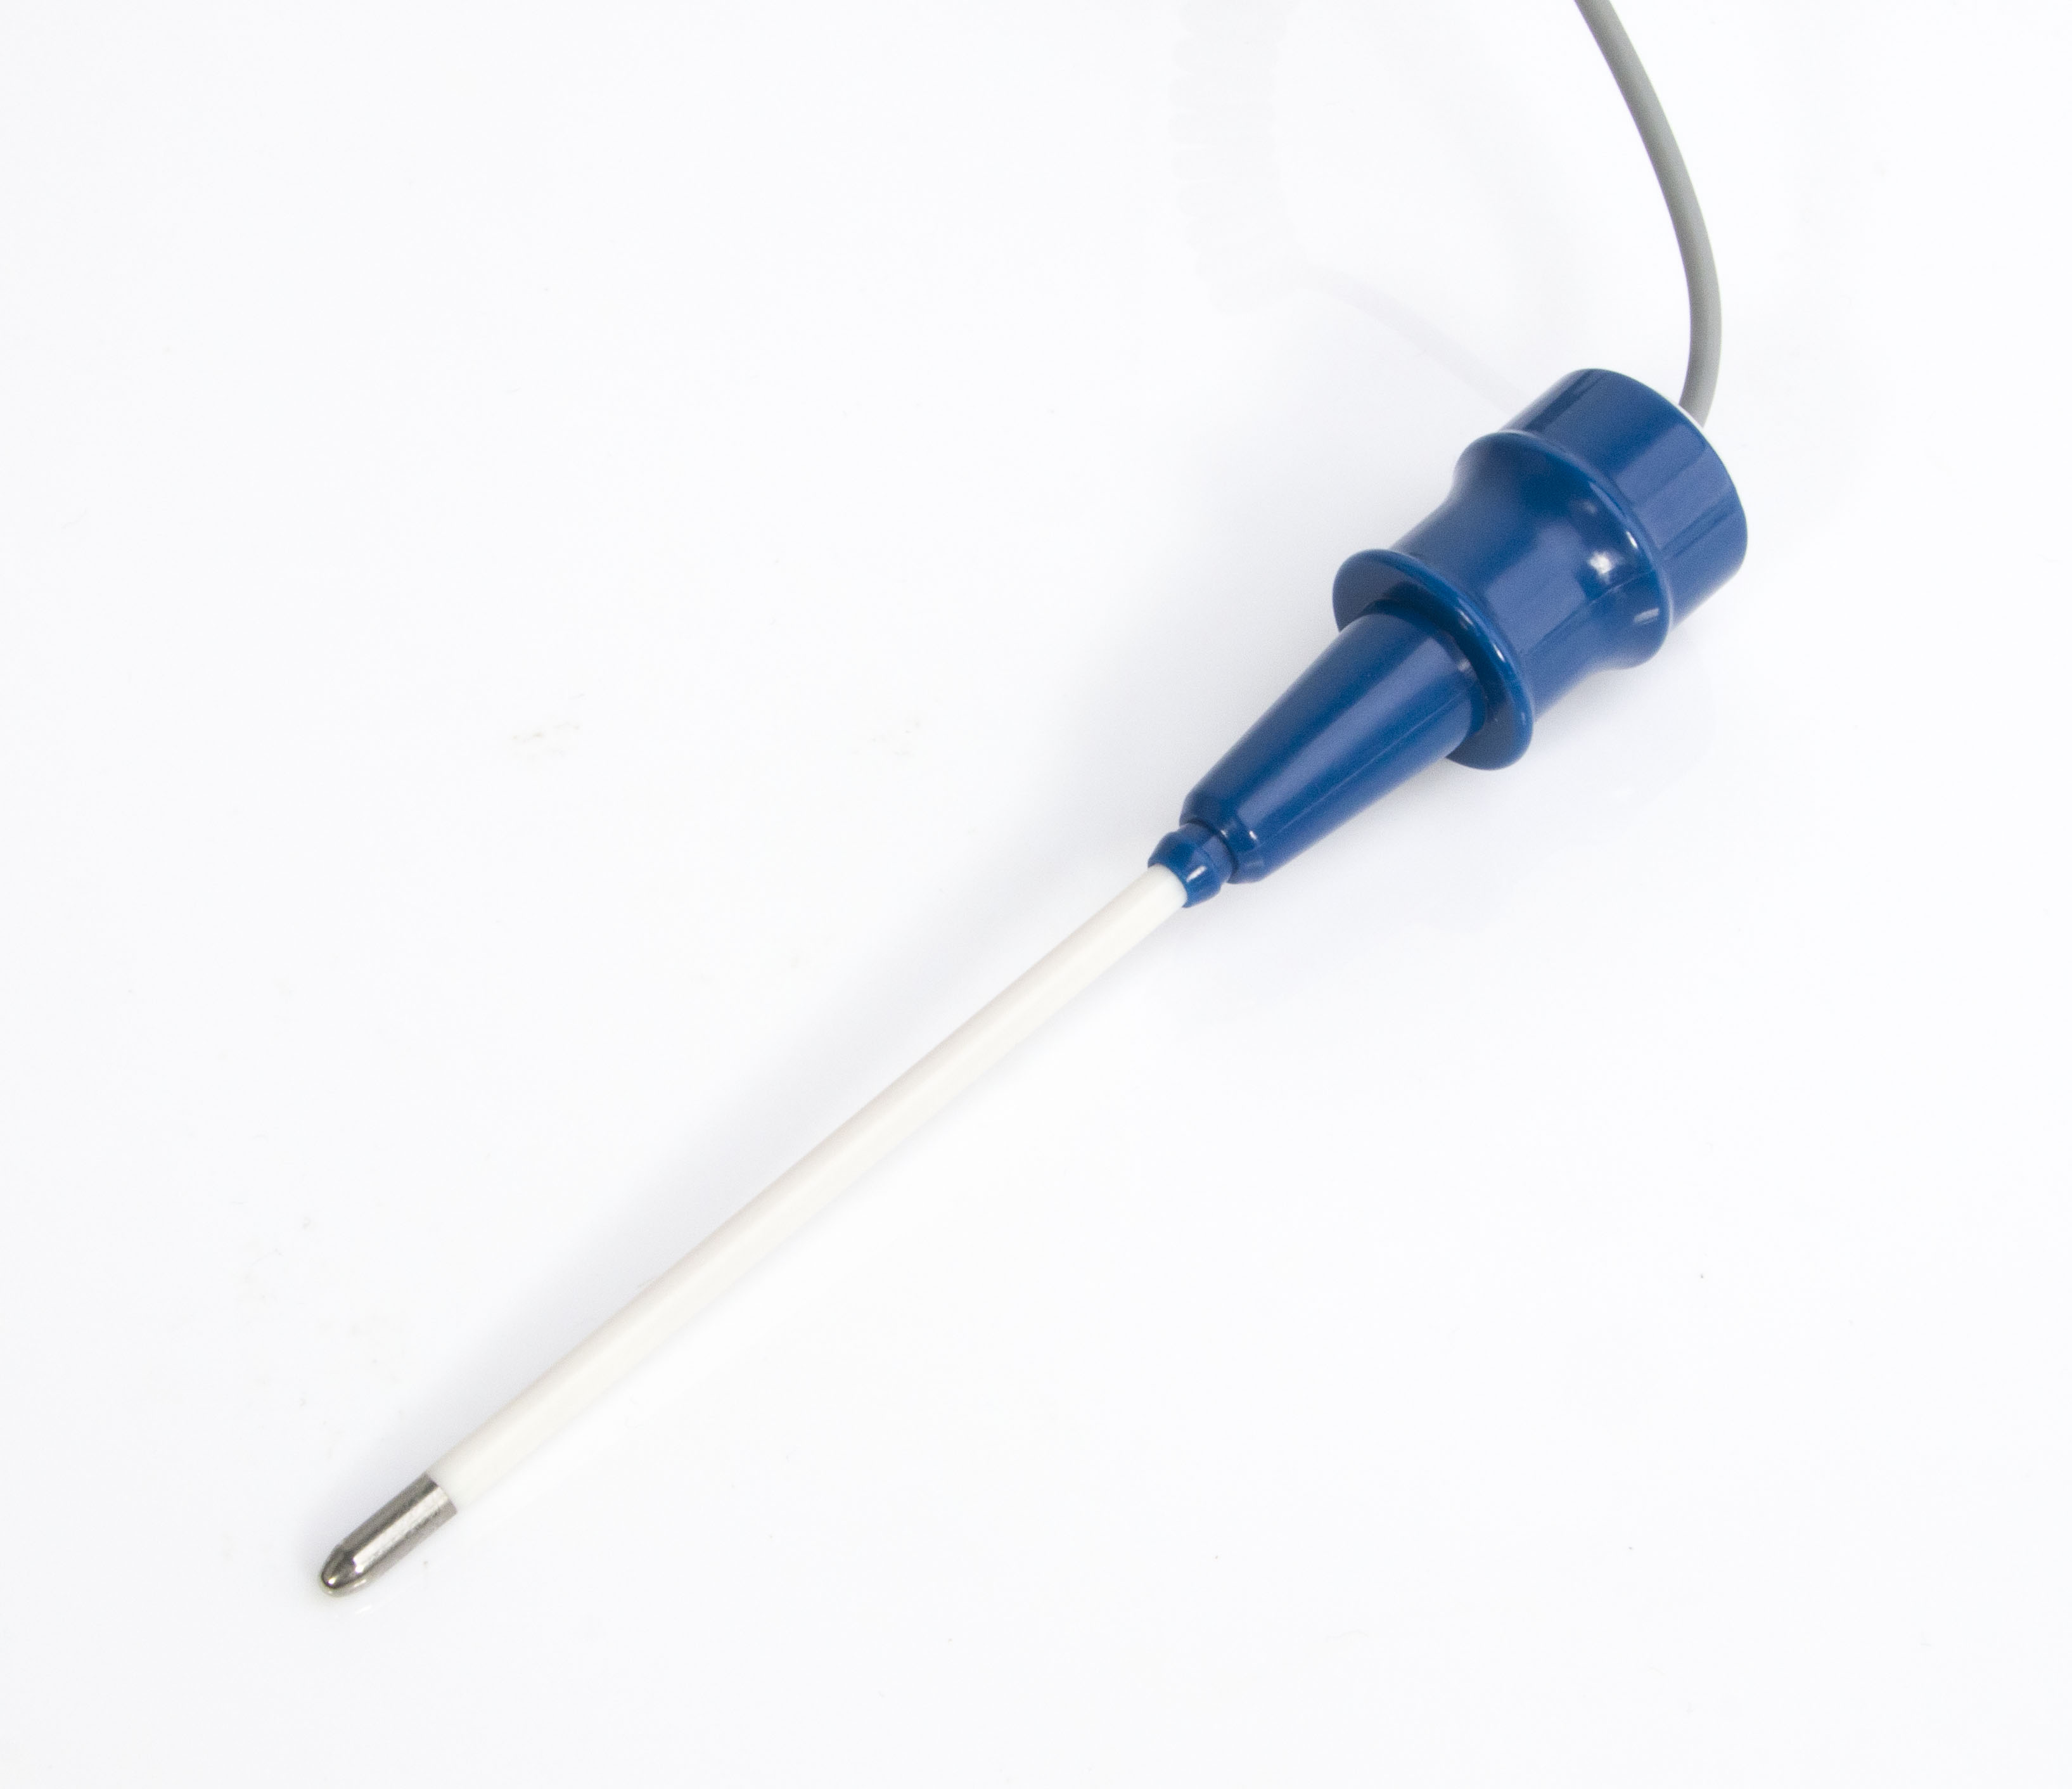 Leapmed | Worldwide Needle Guides Supplier